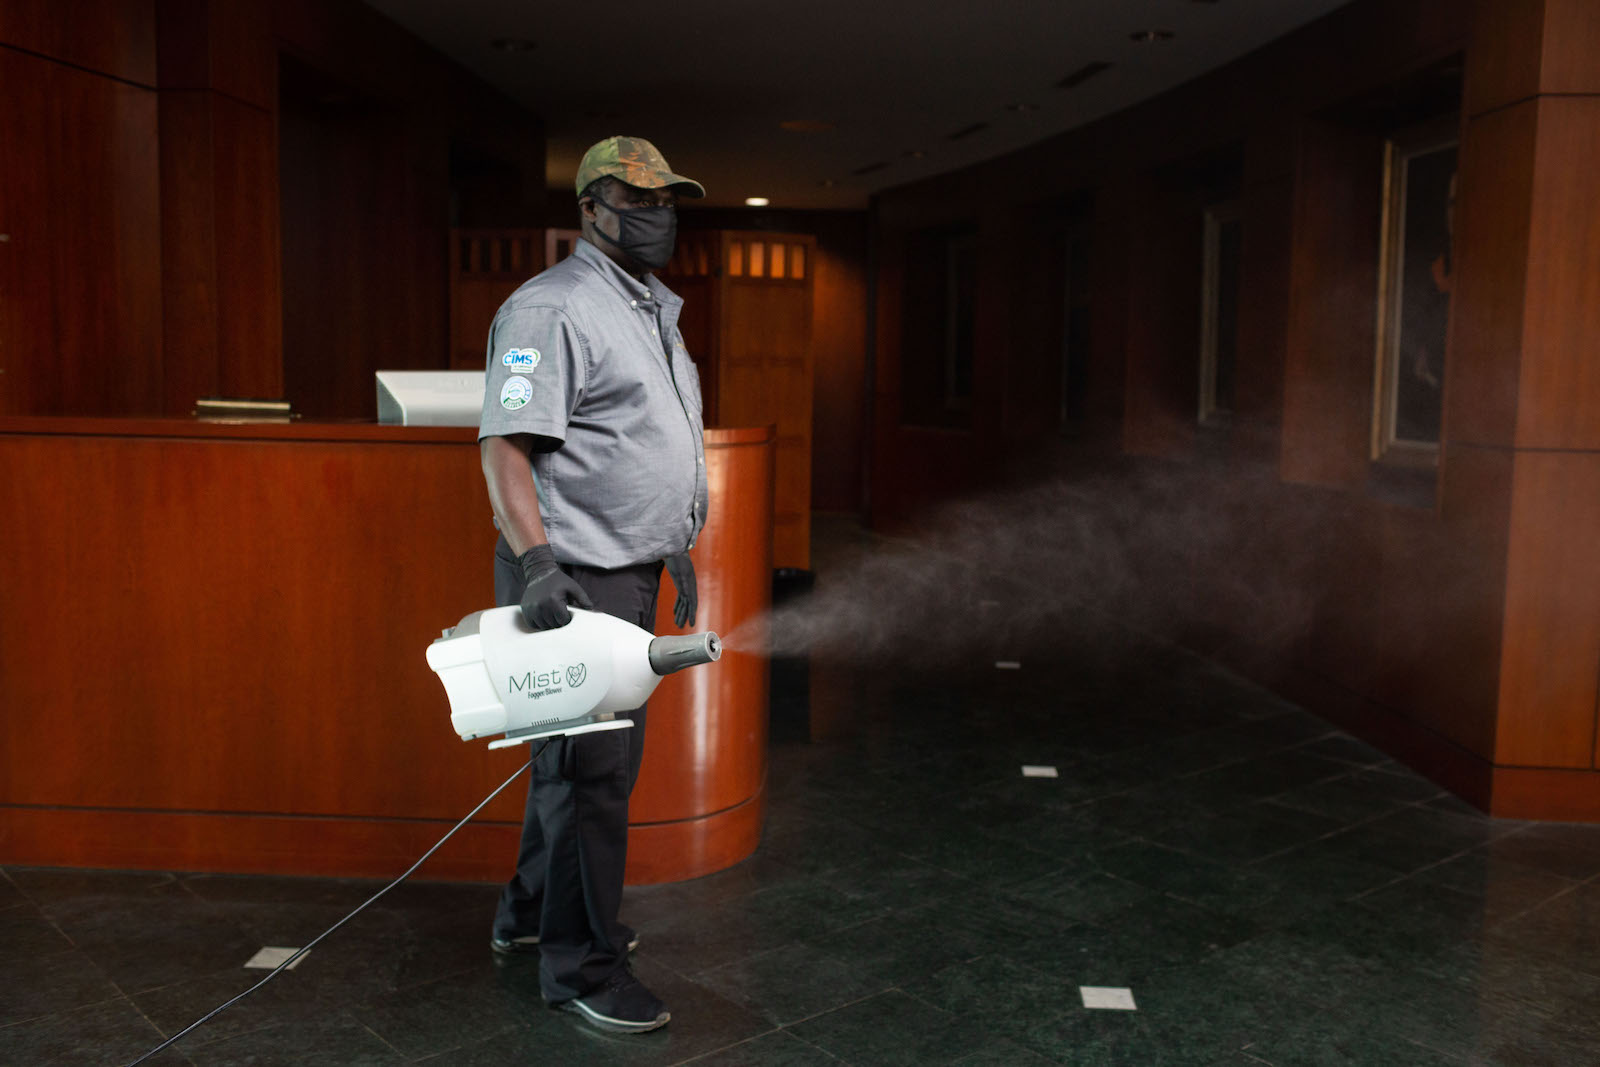 Seth Osekre uses a disinfecting fogger. The disinfectant has a fast evaporation rate, leaving no residue or odor behind. (Photo by Allison Carter)